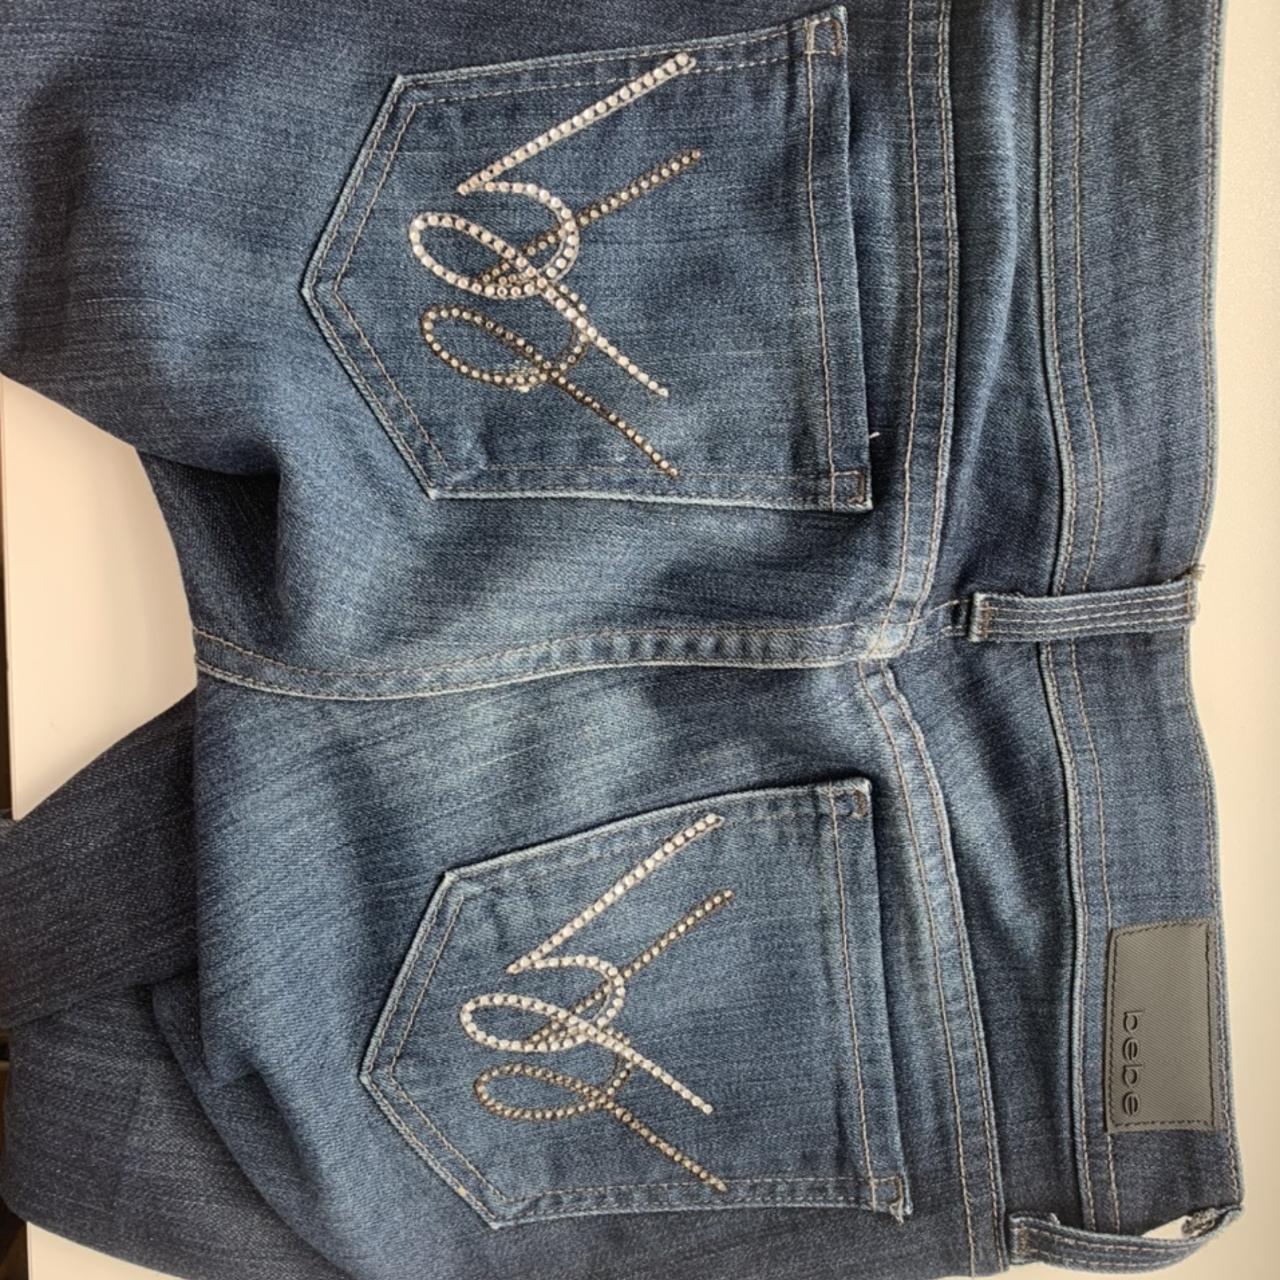 Unreal vintage Bebe low rise jeans So adorable With... - Depop